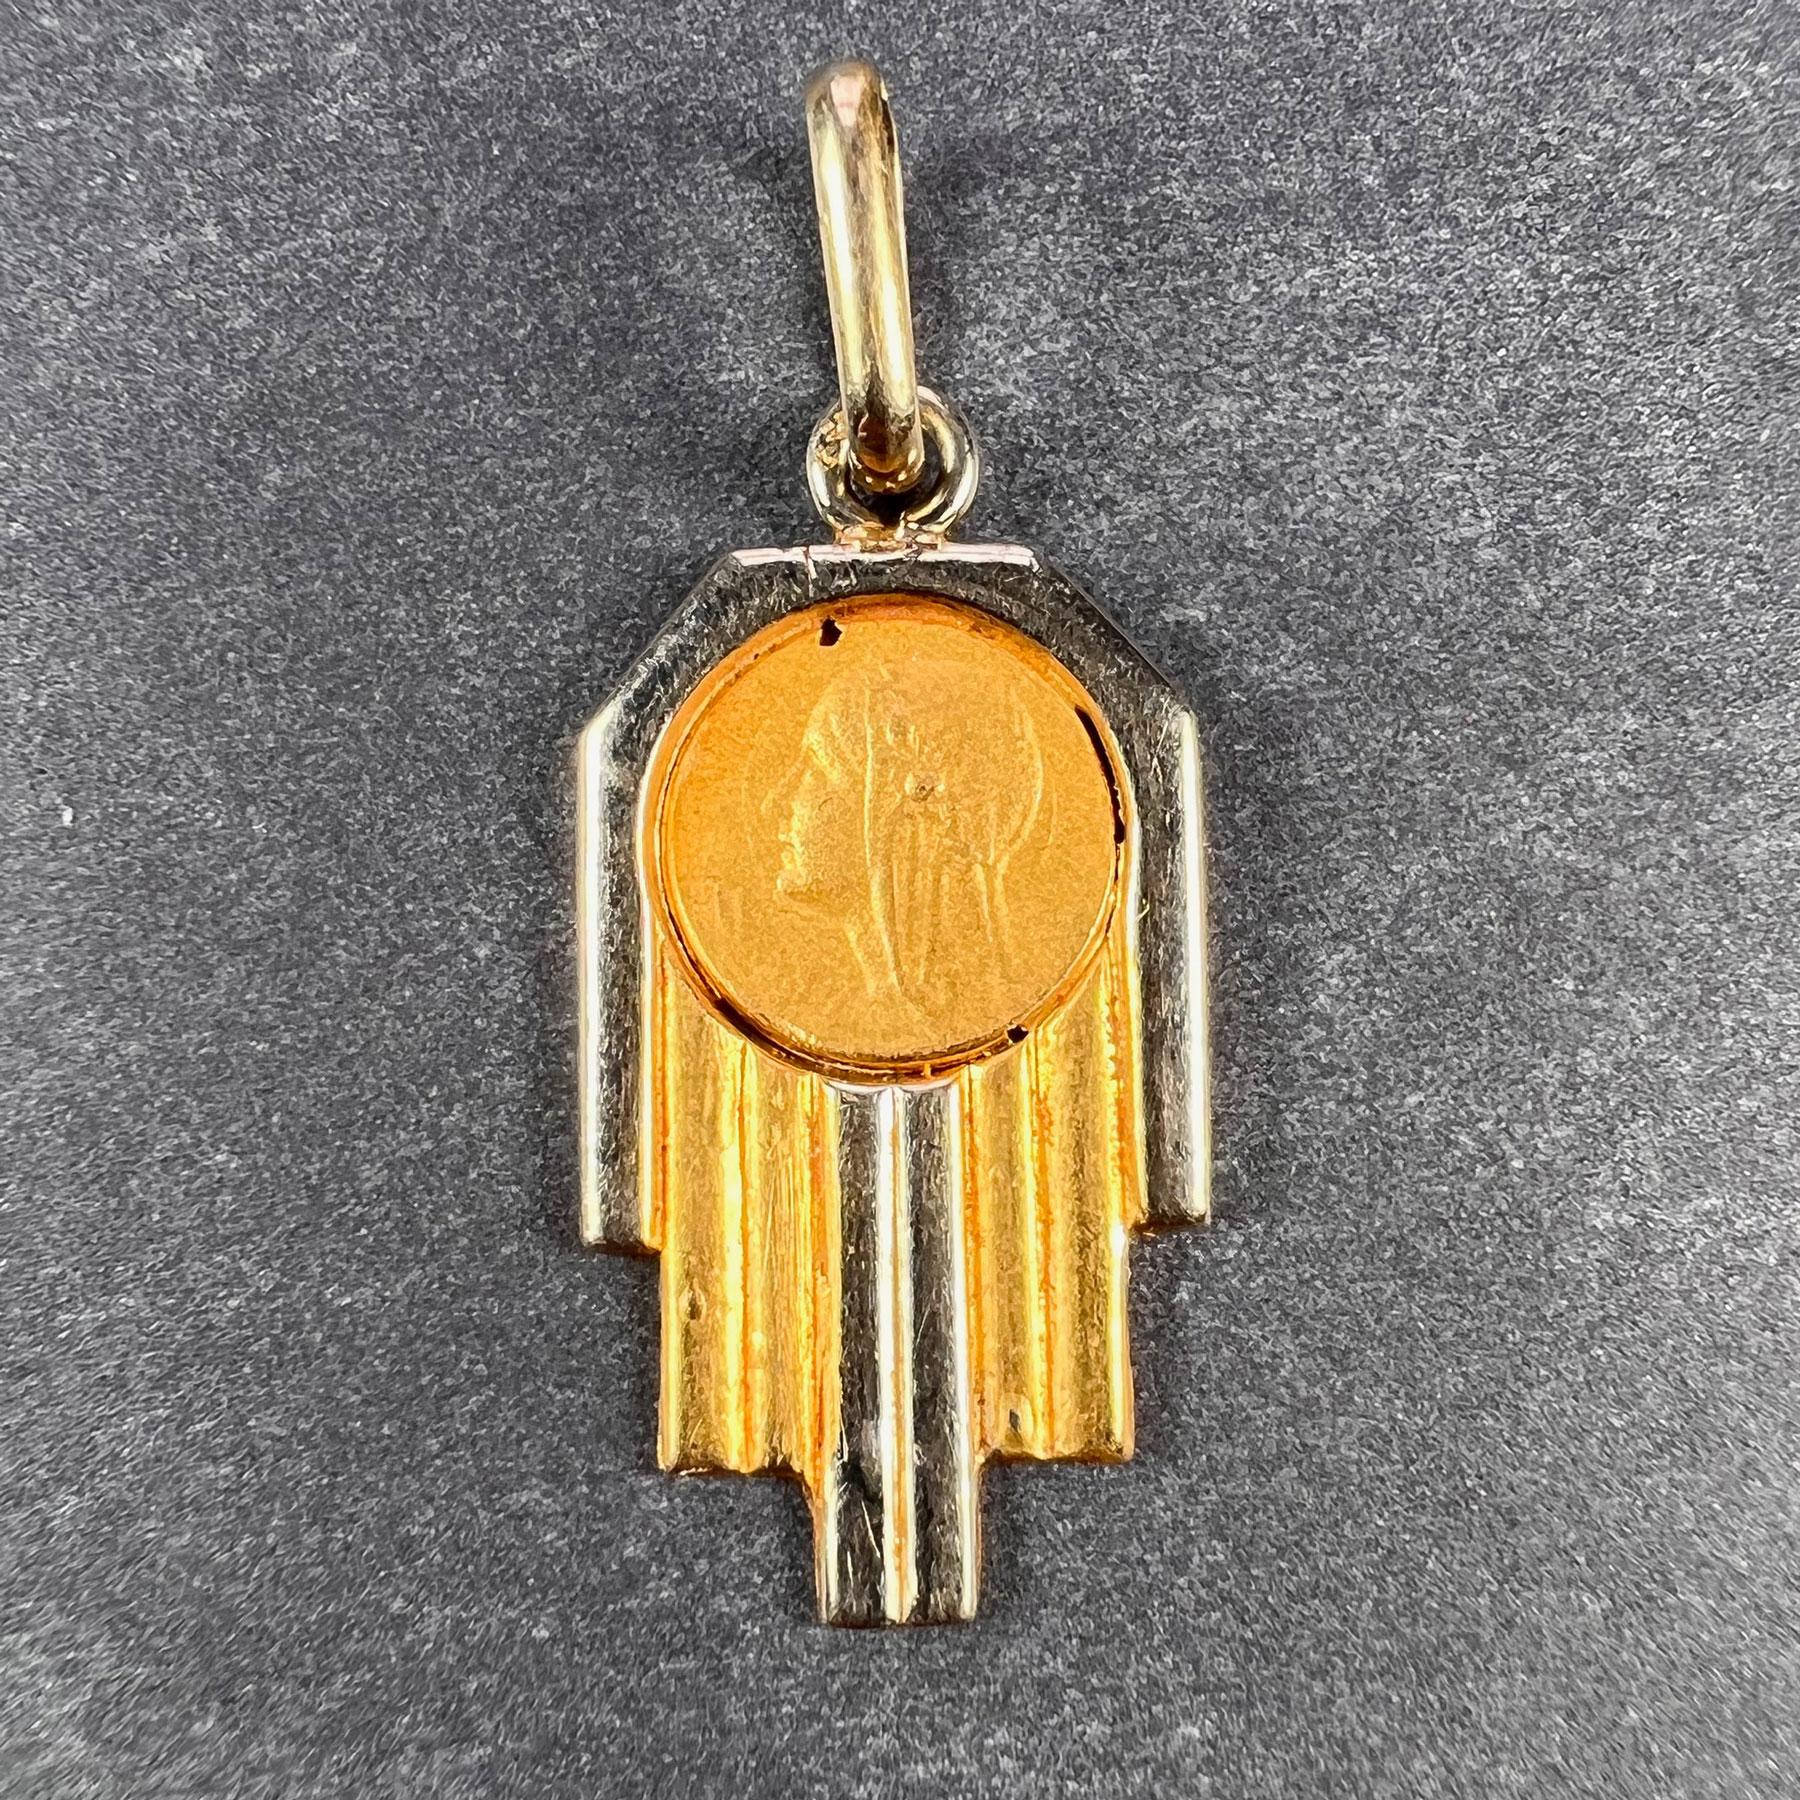 A French 18 karat (18K) yellow and white gold charm pendant designed as an Art Deco geometric pendant set with a circular medal depicting the Virgin Mary. Stamped with the eagle mark for 18 karat gold and French manufacture.

Dimensions: 2.2 x 1.1 x